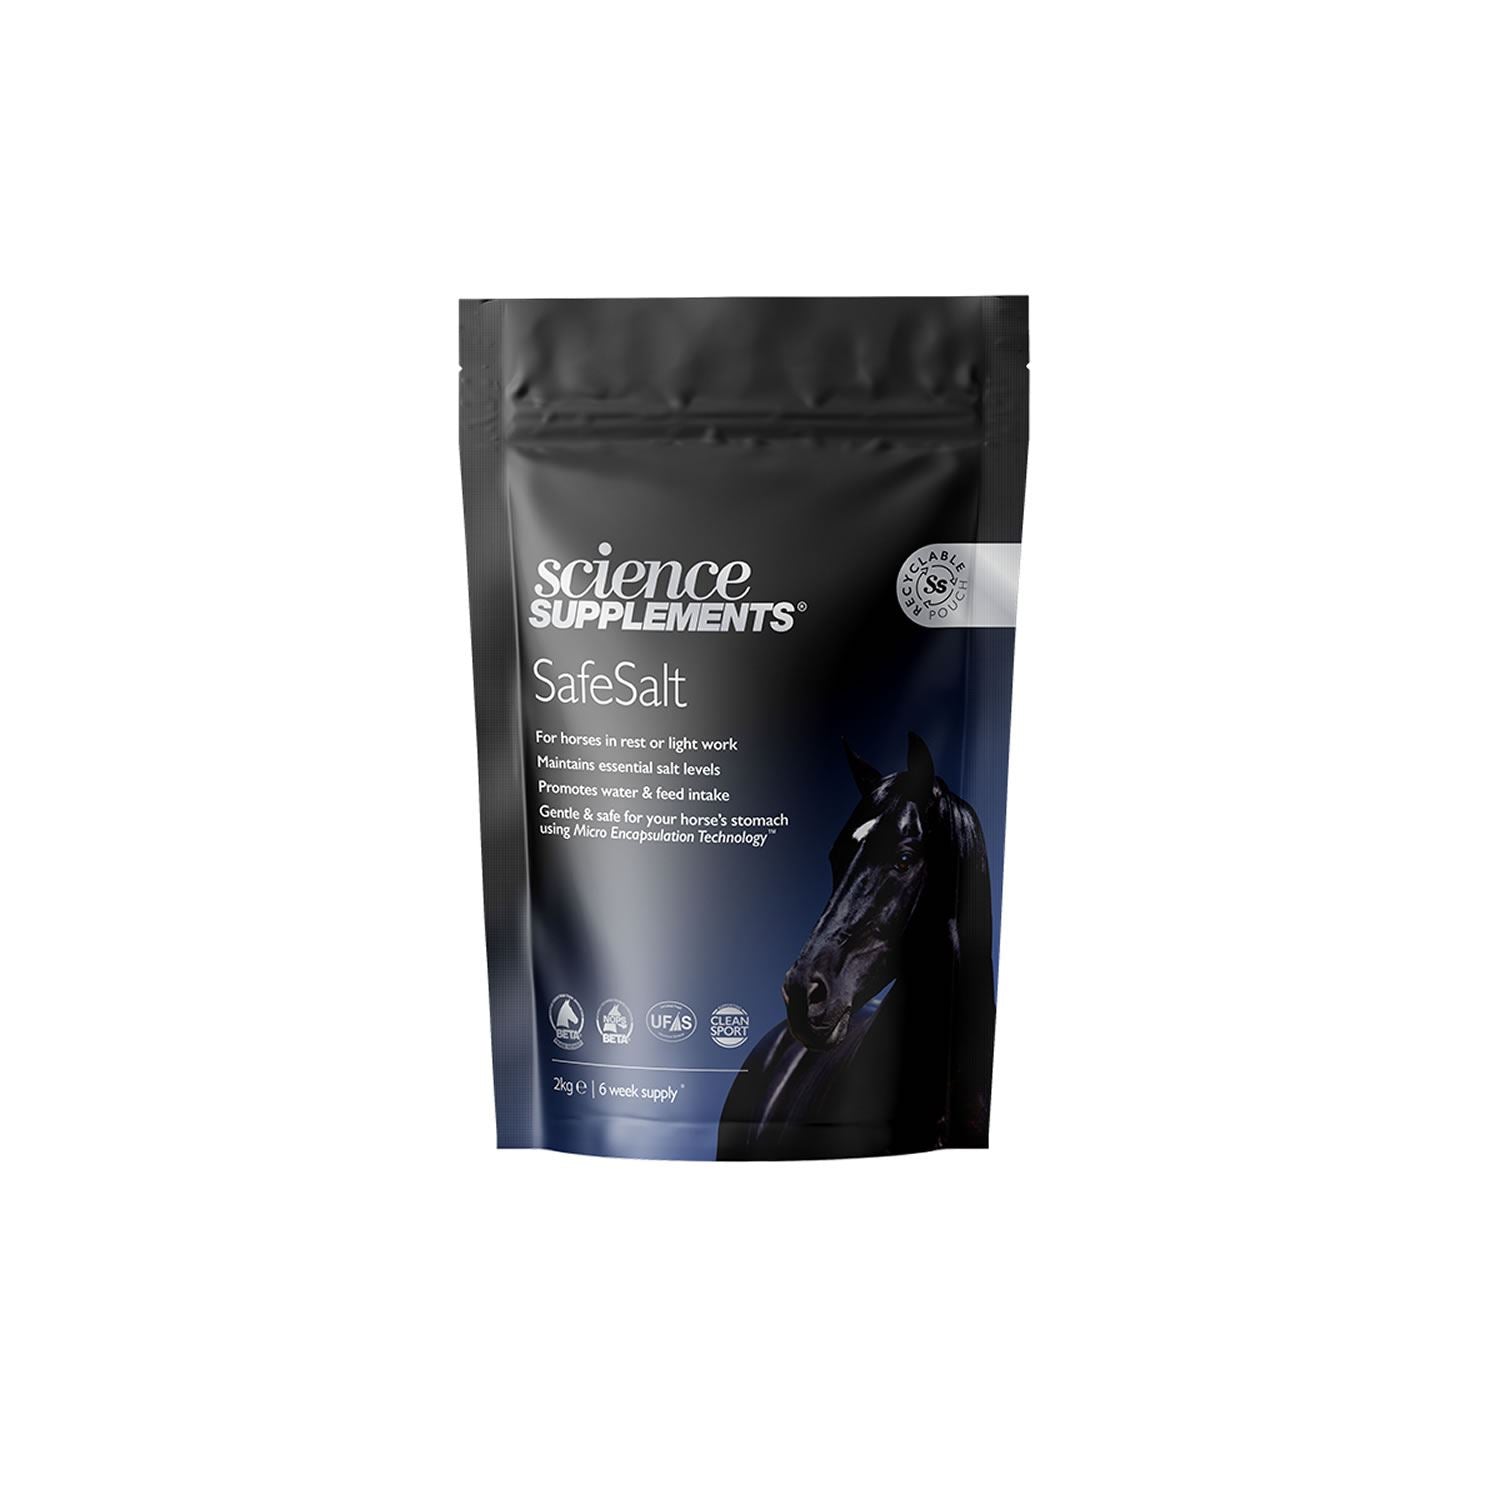 Science Supplements Safesalt - Just Horse Riders